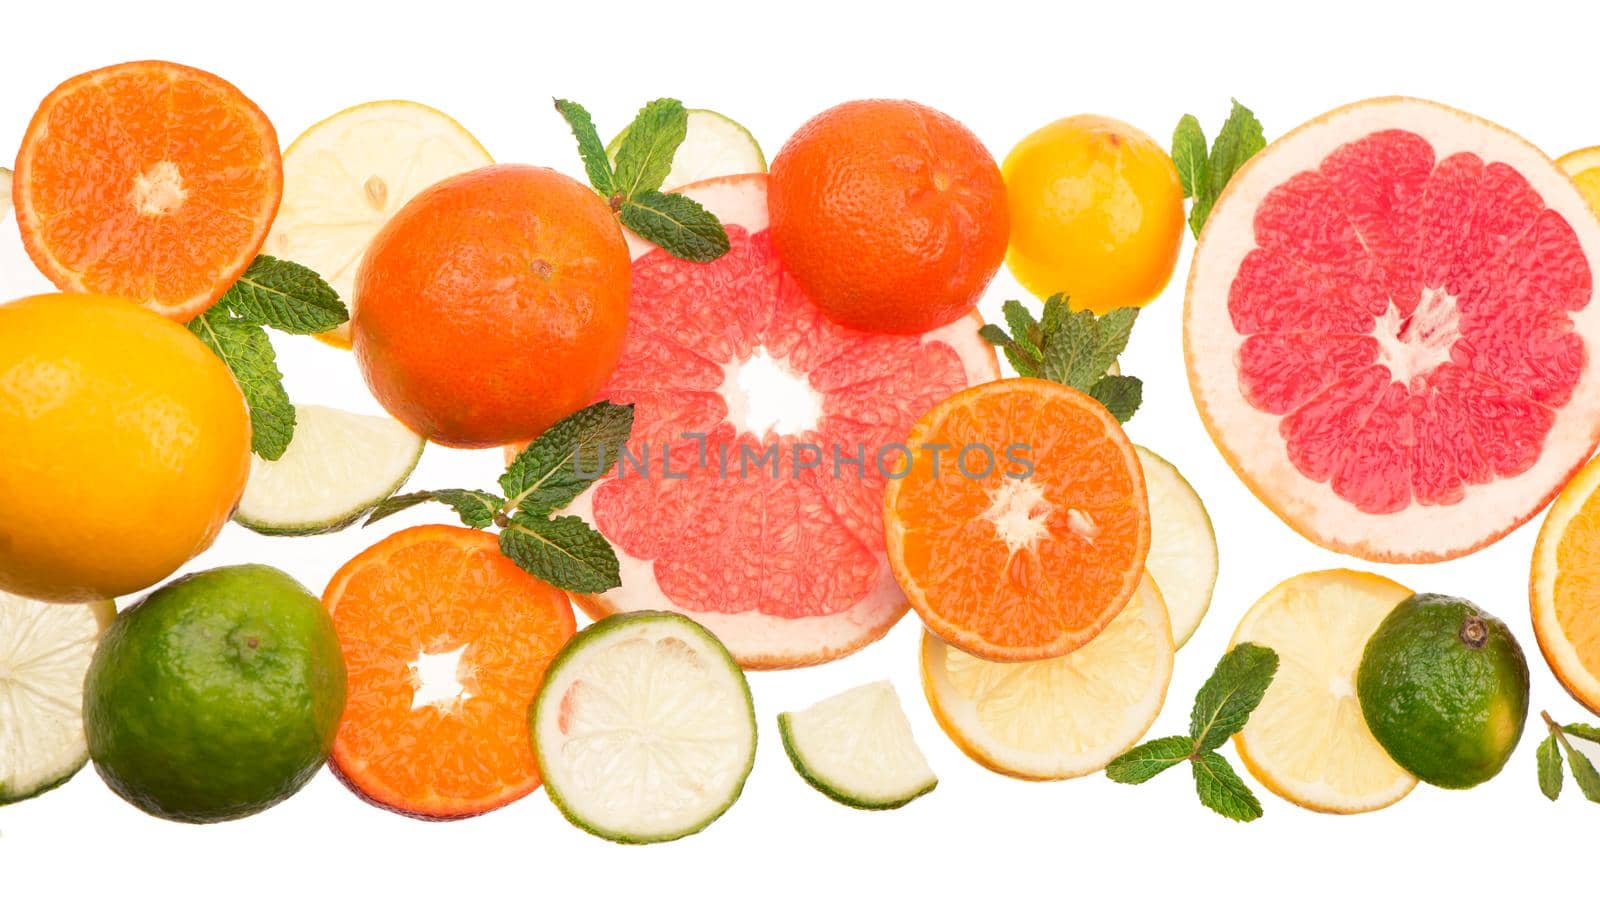 Mixed citrus fruit including lemons, limes, grapefruit, and tangerines with mint sprigs isolated on a white background by aprilphoto